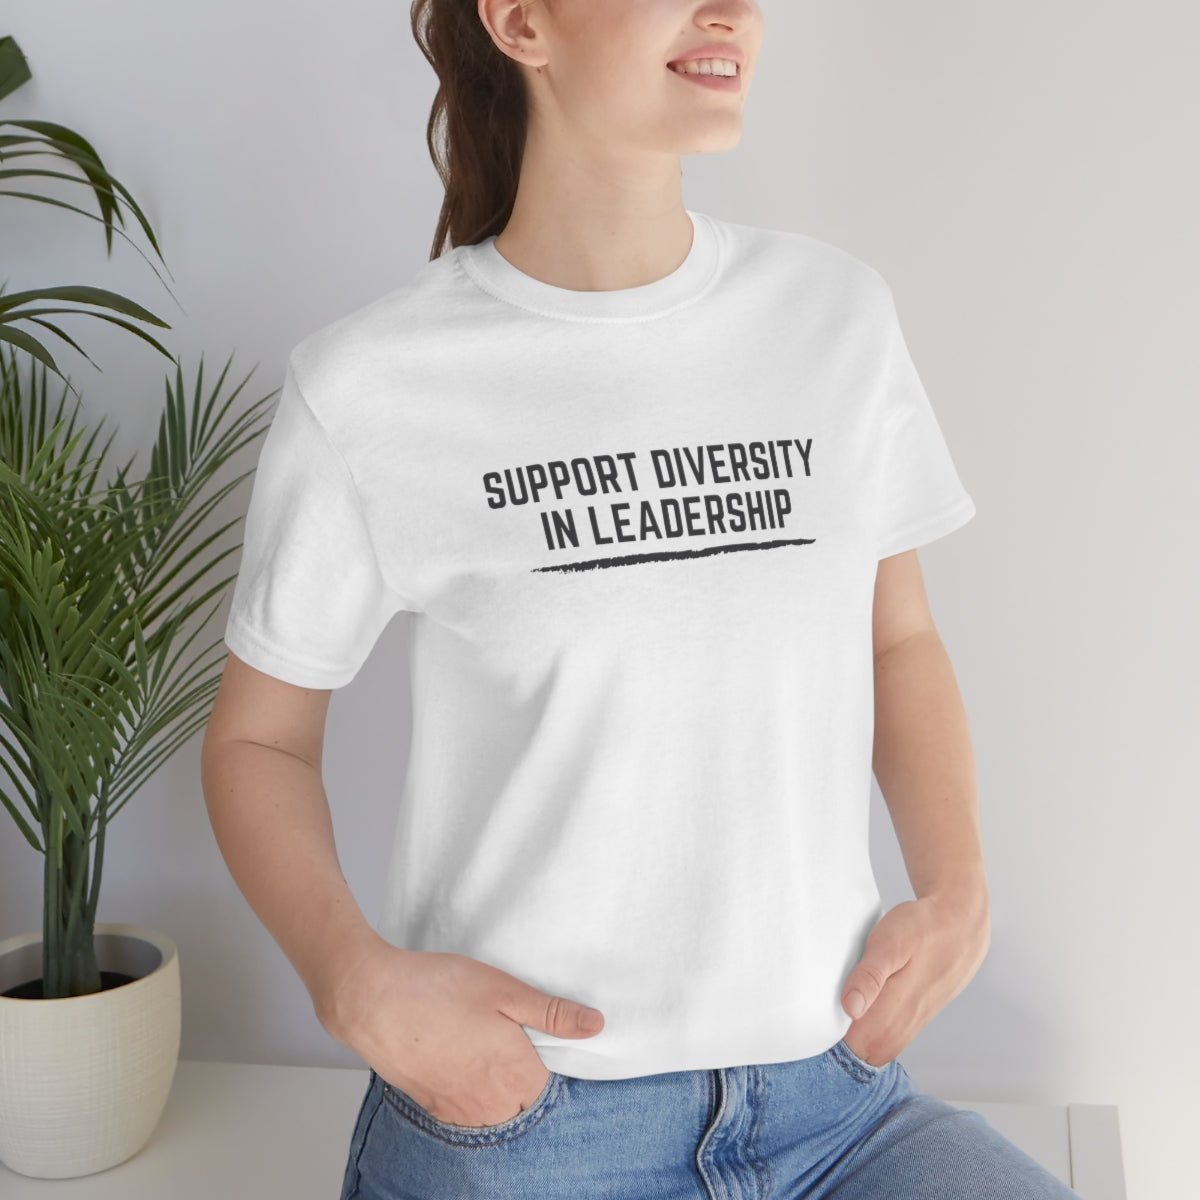 Diversity T shirts, Diversity in Leadership, Support Diversity, DEI, Diversity, Equity, Inclusion Shirts Corporate Empowerment, HR T shirts